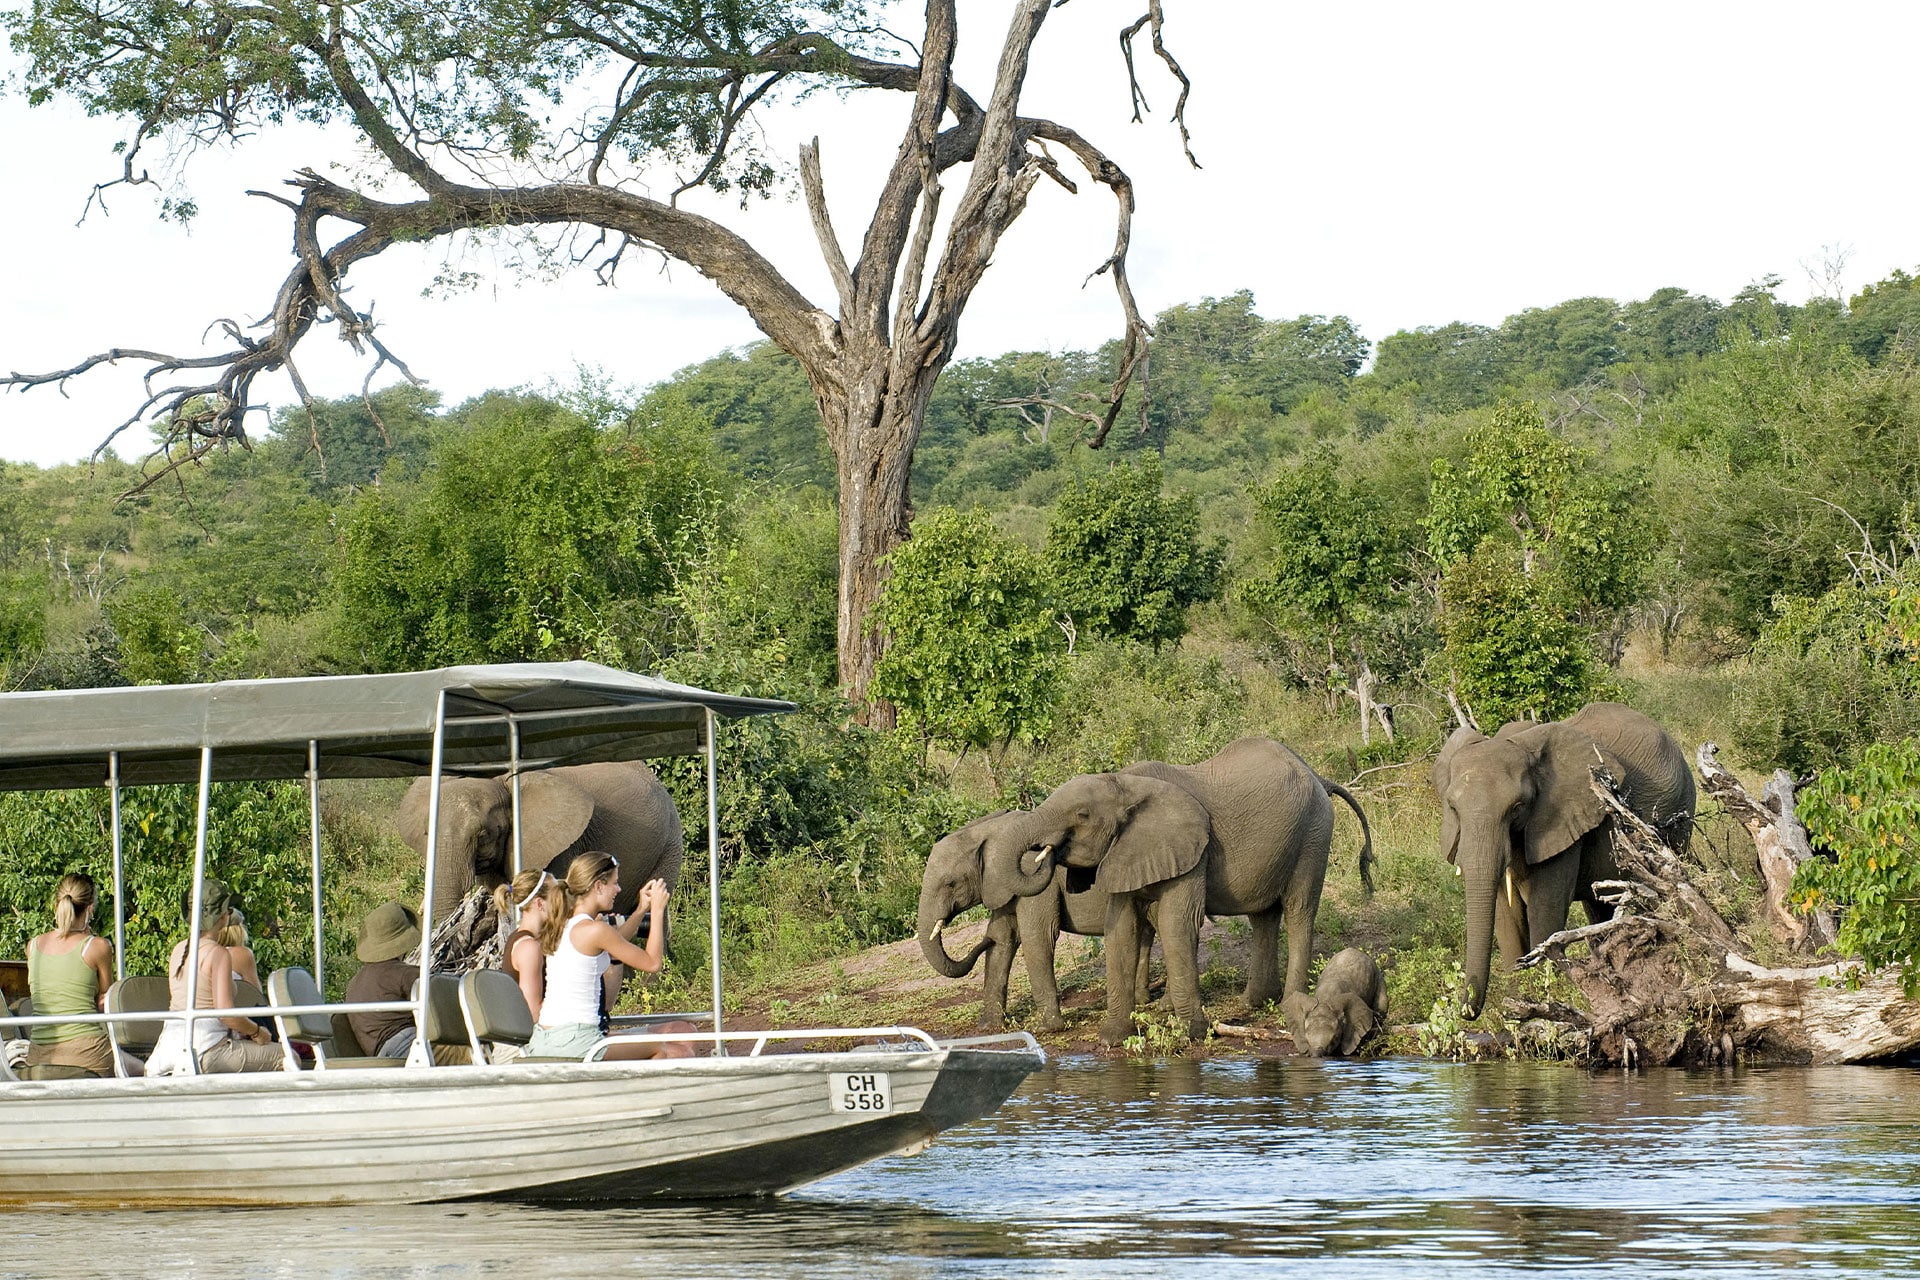 A boat of people watching elephants drinking from a river at Chobe